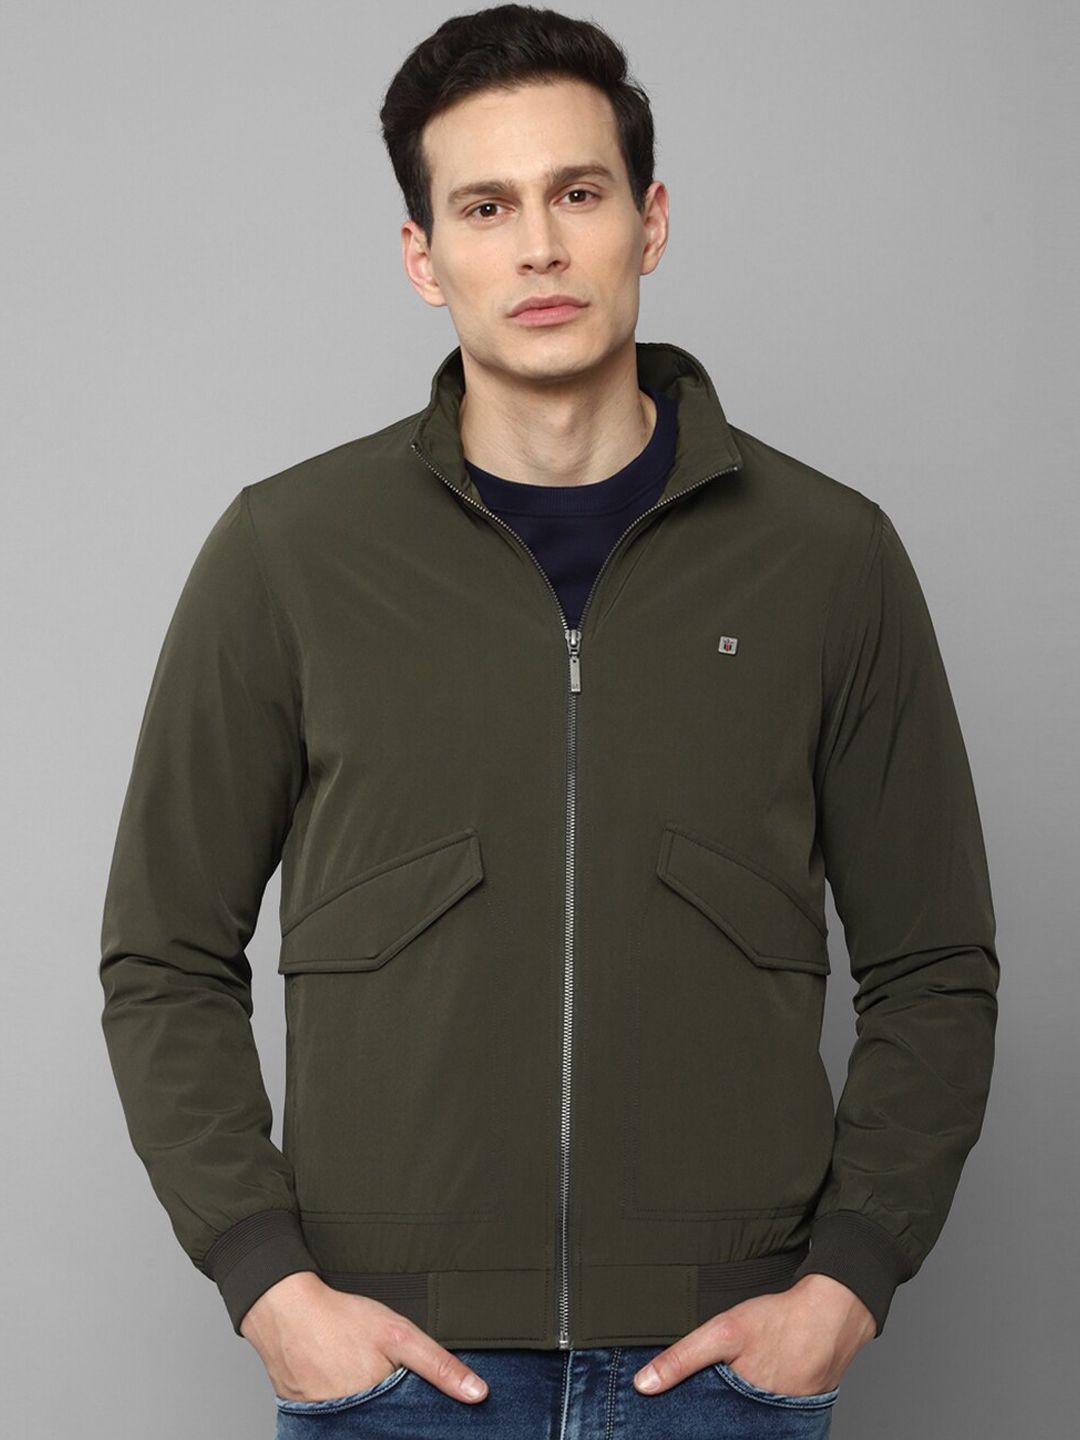 louis-philippe-jeans-men-olive-green-bomber-jacket